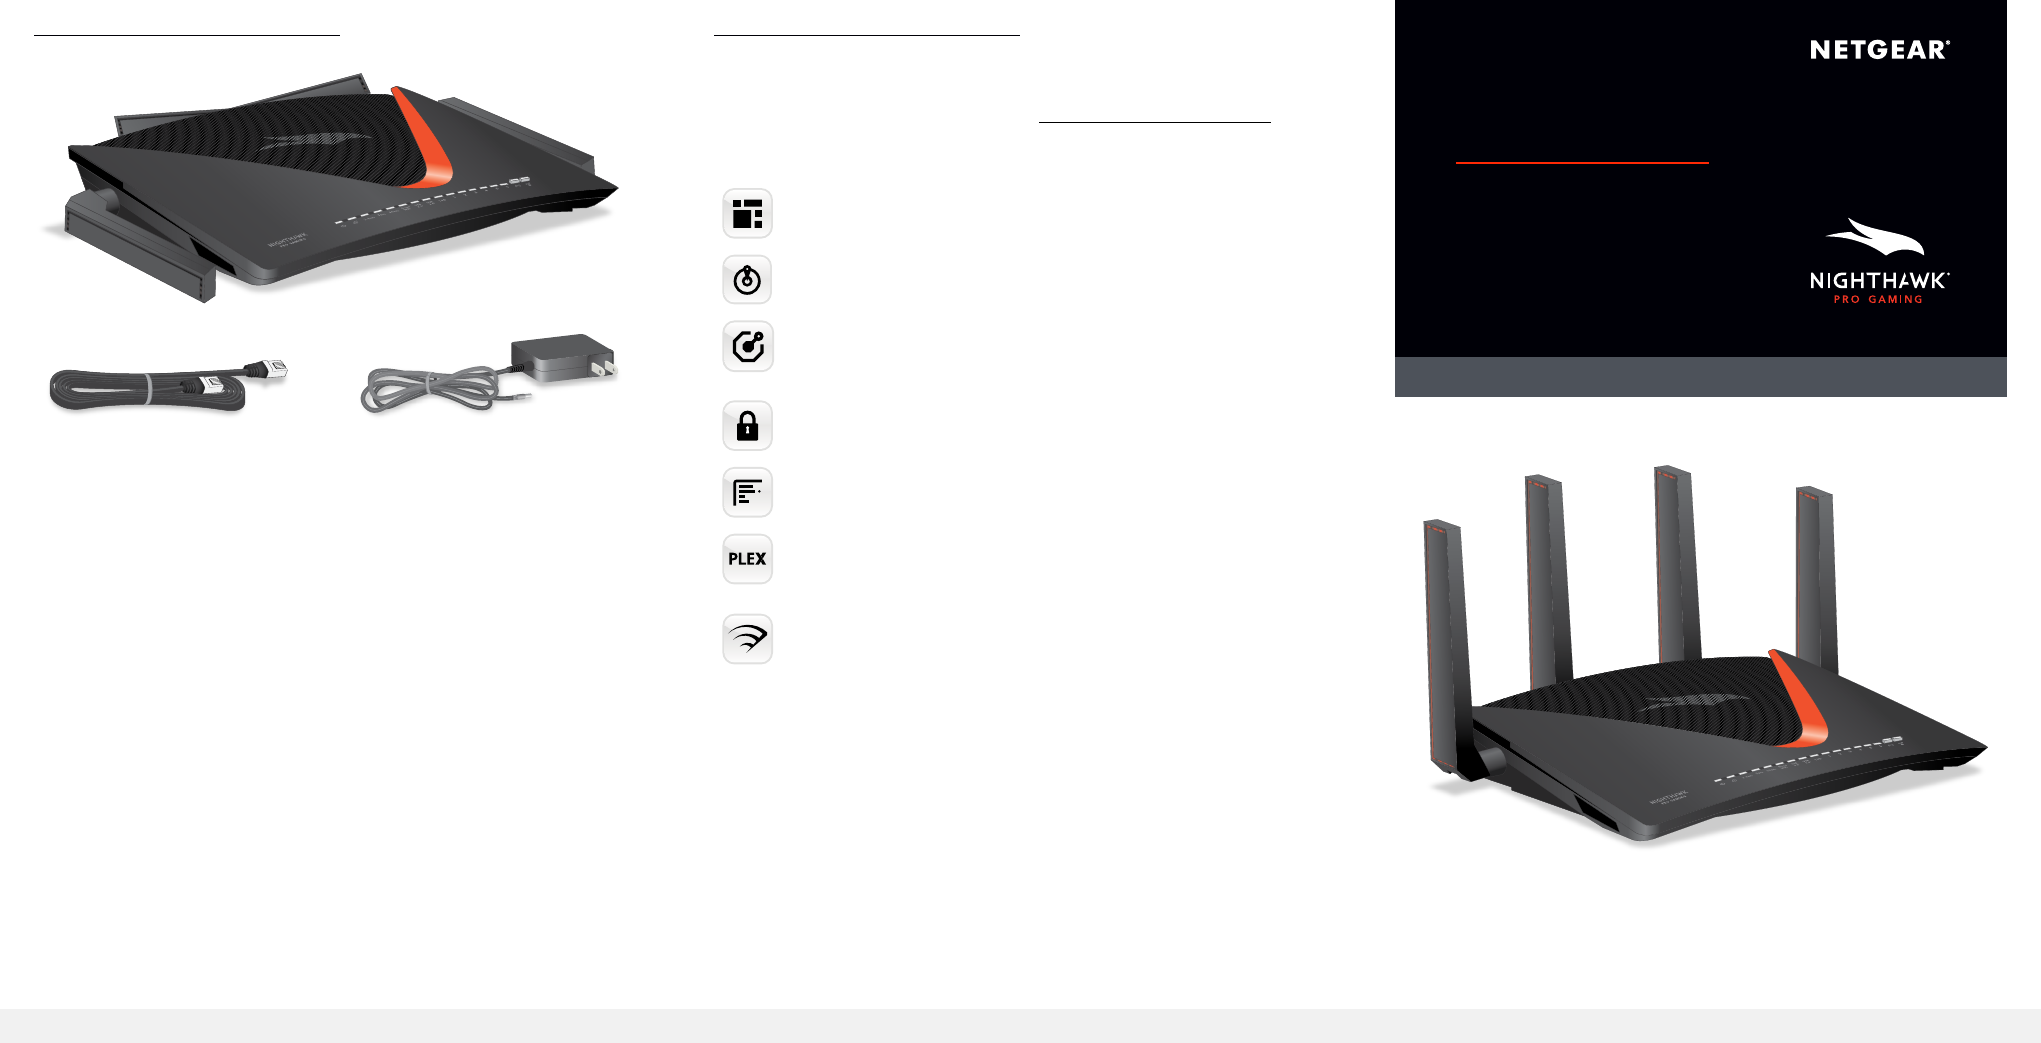 manual-netgear-xr700-nighthawk-pro-gaming-router-page-1-of-2-english